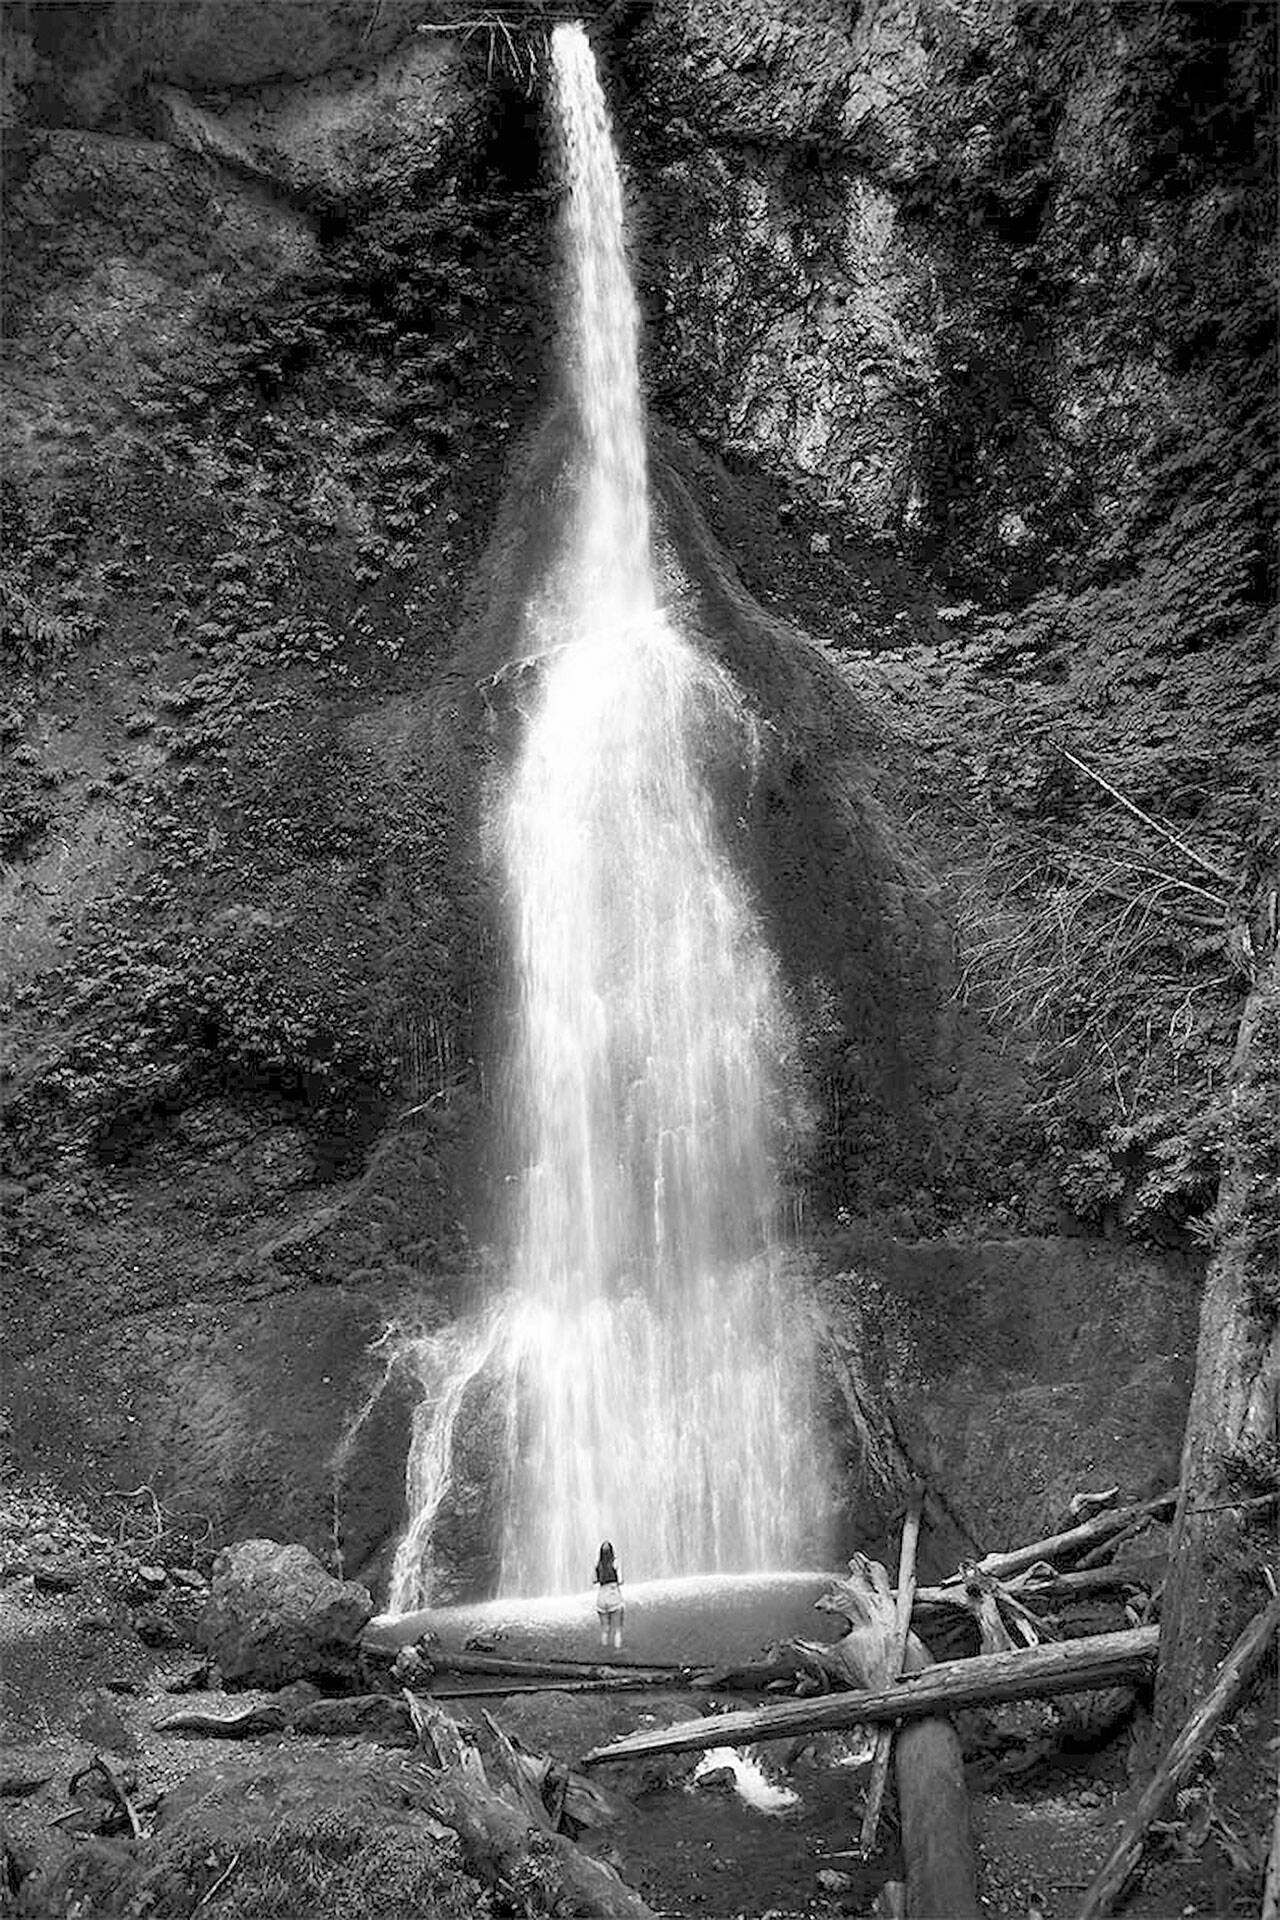 (Northwind Art Woman and Waterfall by Alisa Steck) “Woman and Waterfall,” at Marymere Falls, won Alisa Steck the Curator’s Choice Award in the “Wet” exhibition at Jeanette Best Gallery in Port Townsend. photo by Alisa Steck